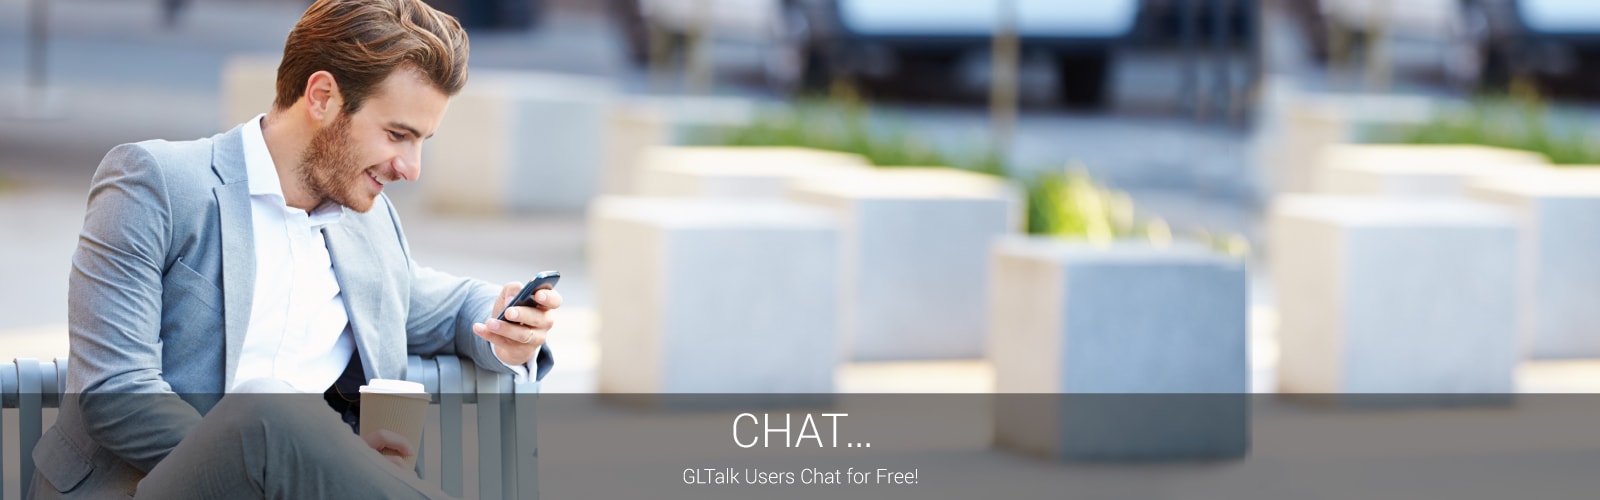 CHAT.GLTalk Users Chat for Free!